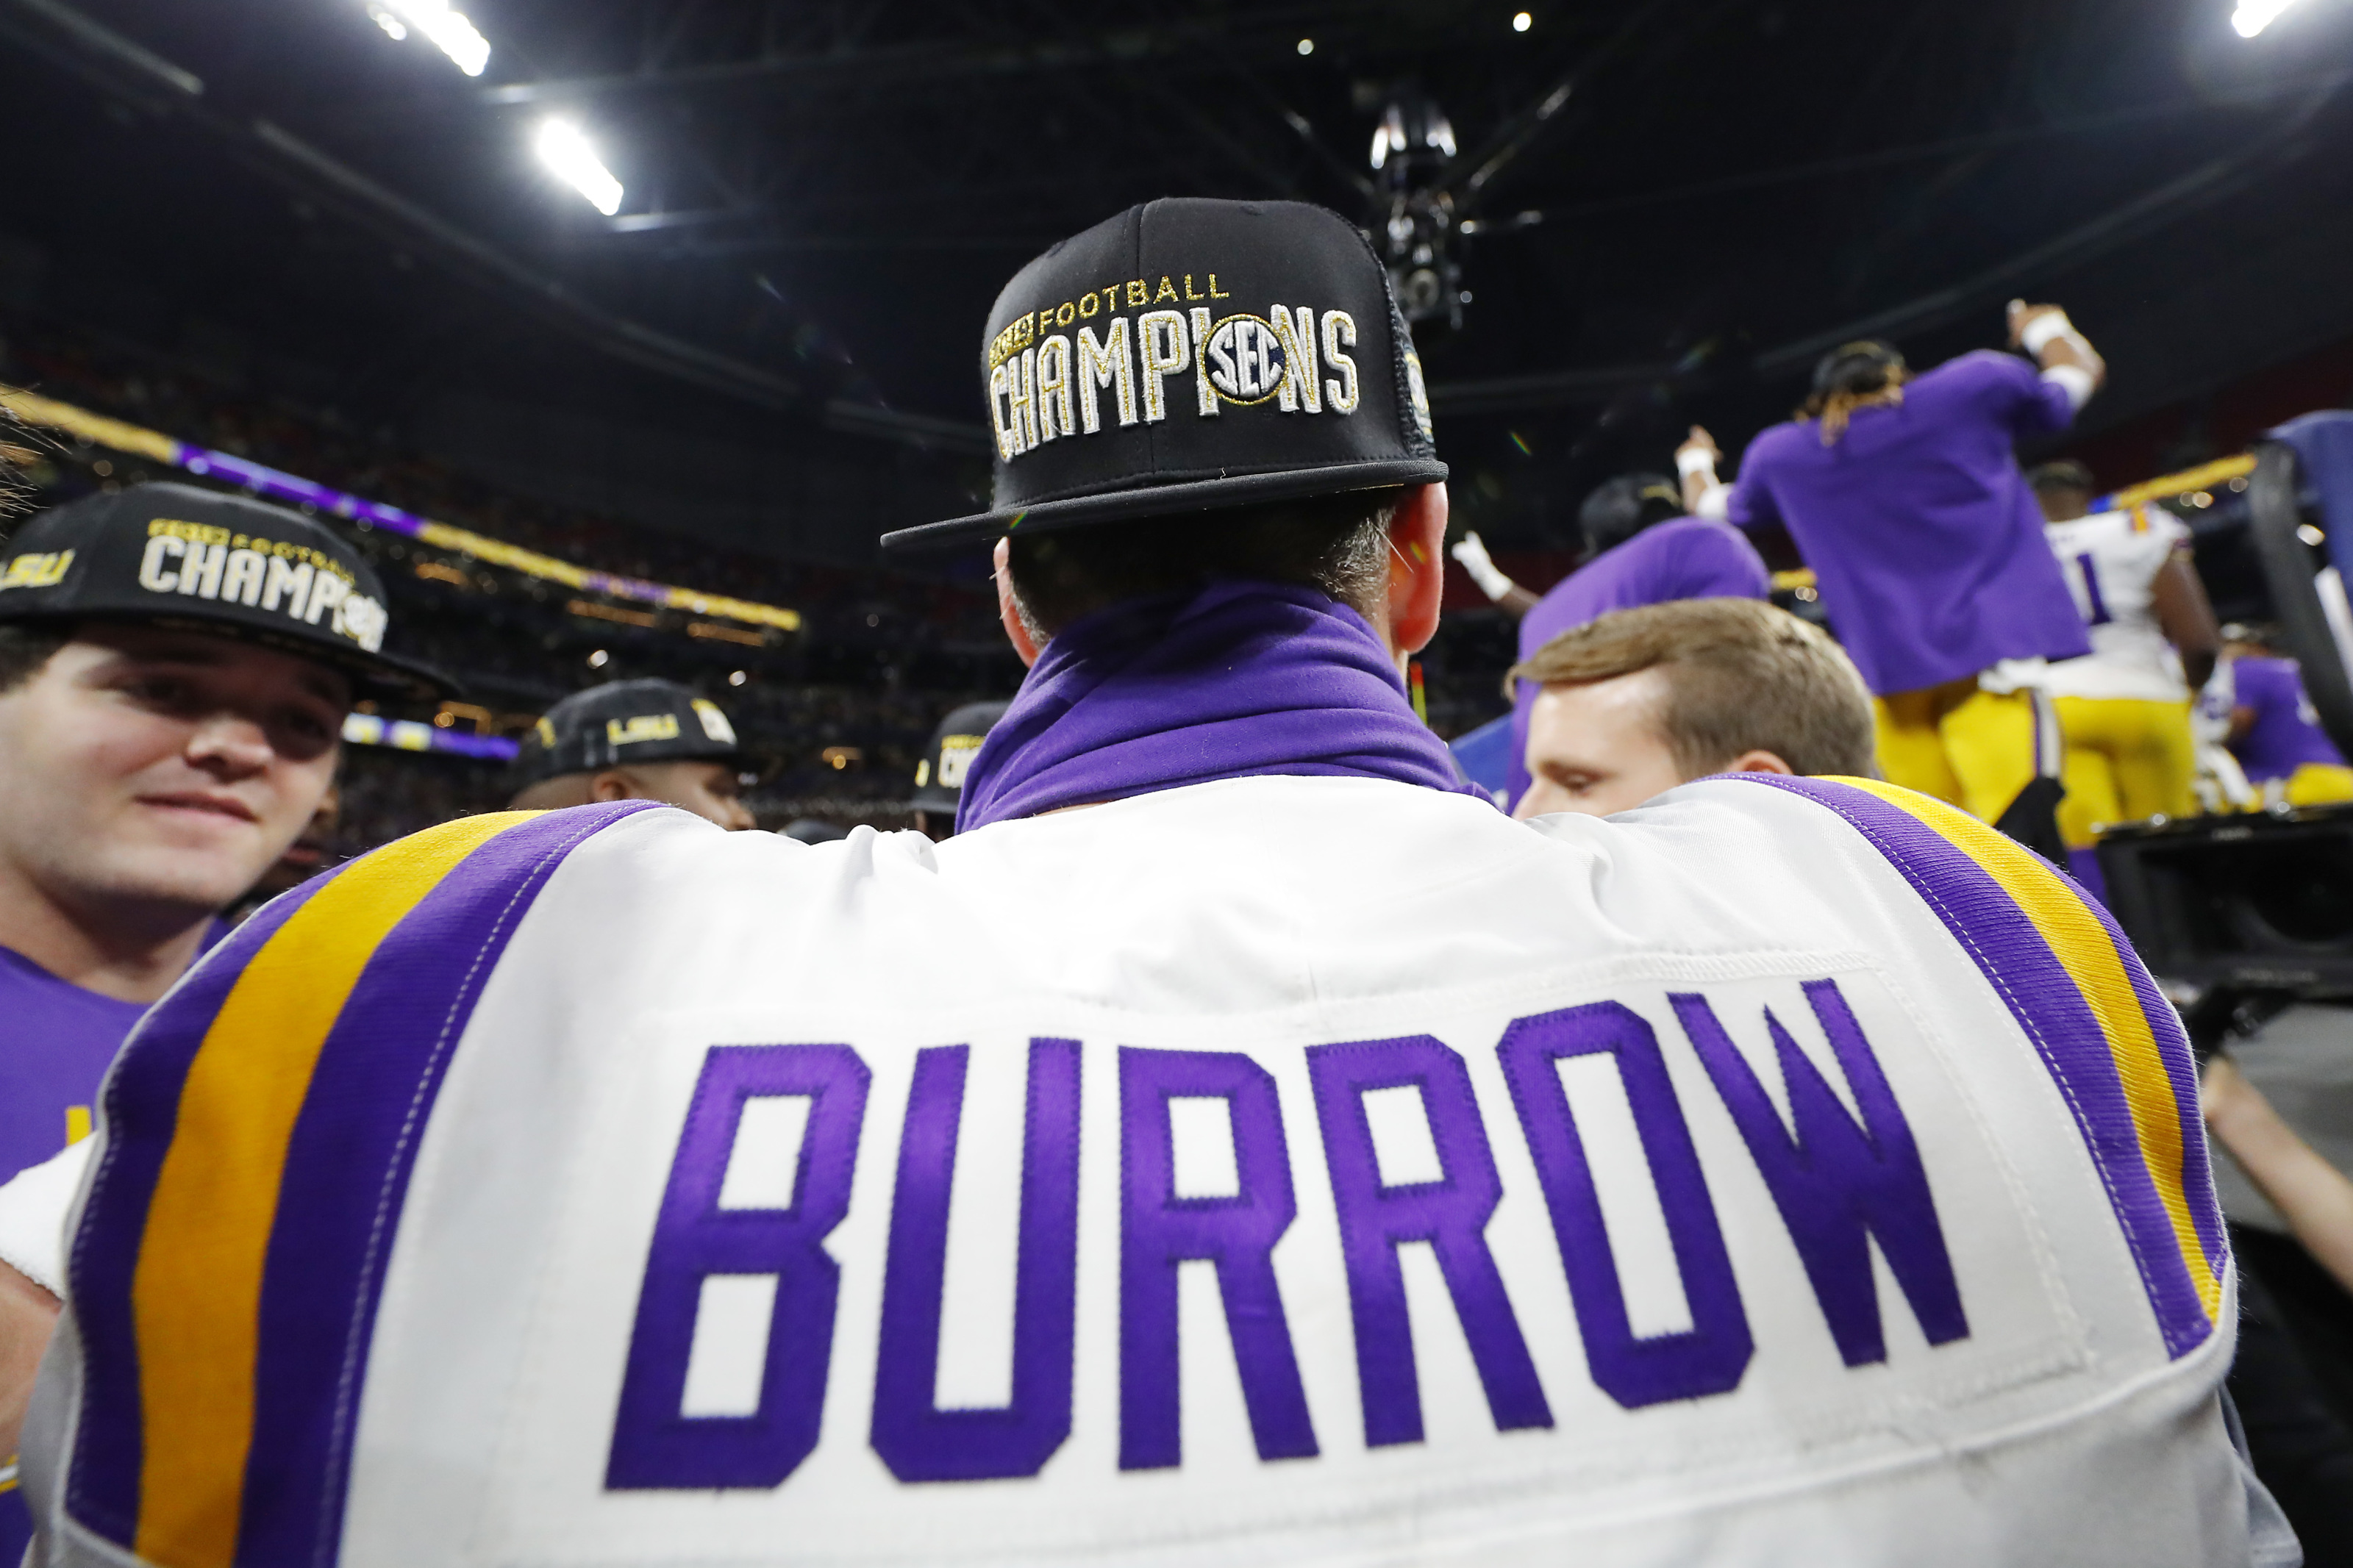 Joe Burrow says he's still a Buckeye long after his time in